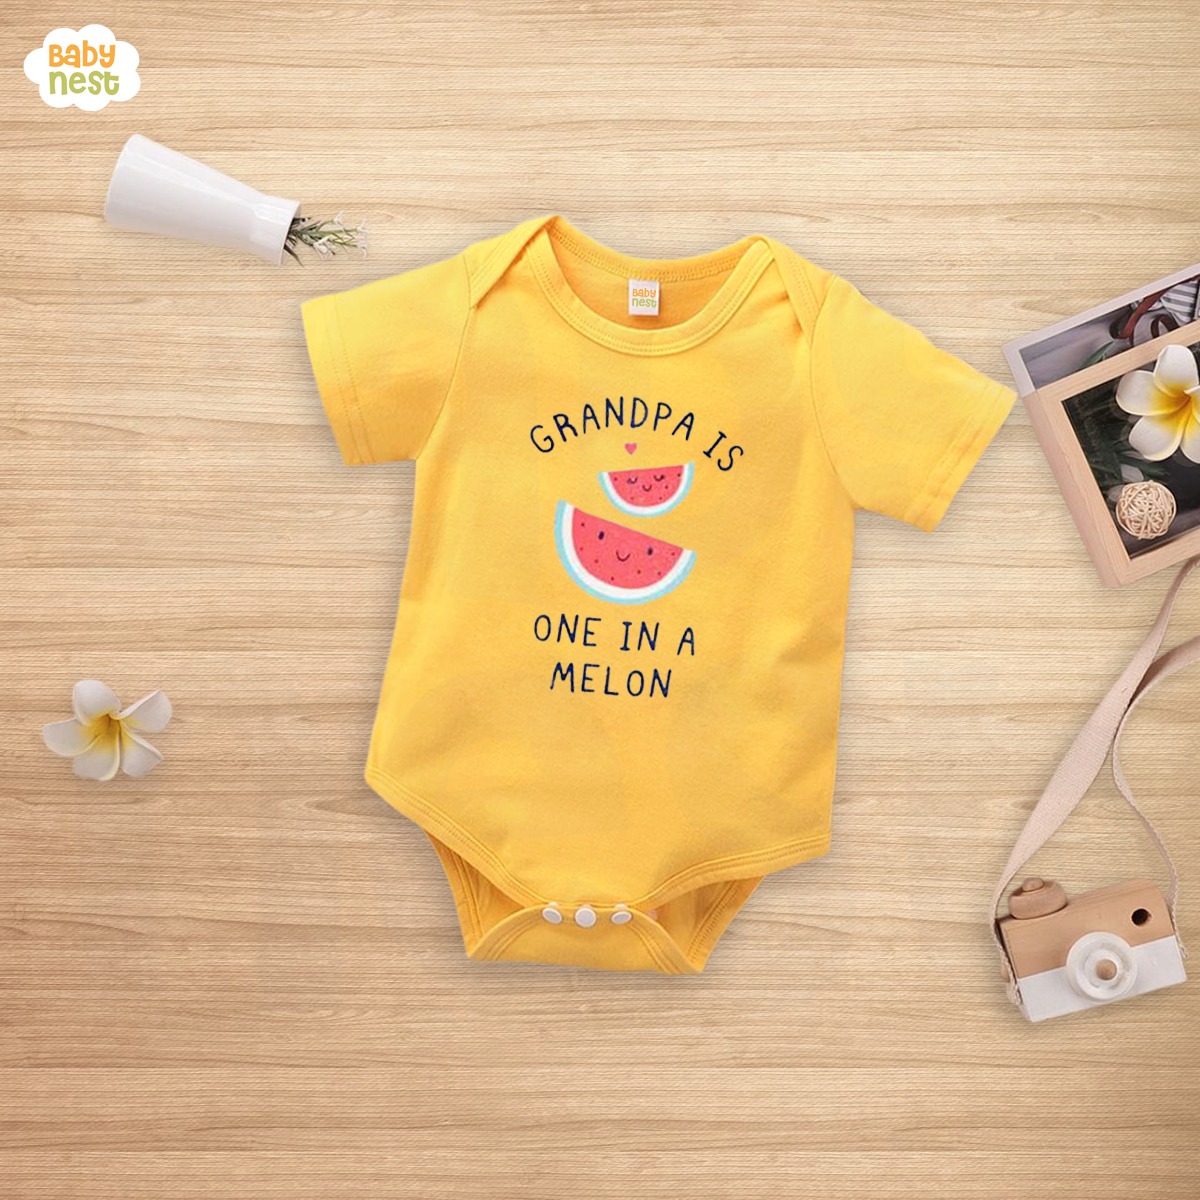 Grandpa in One in a Melon – (Yellow) RBT 110-D4 Romper For Kids